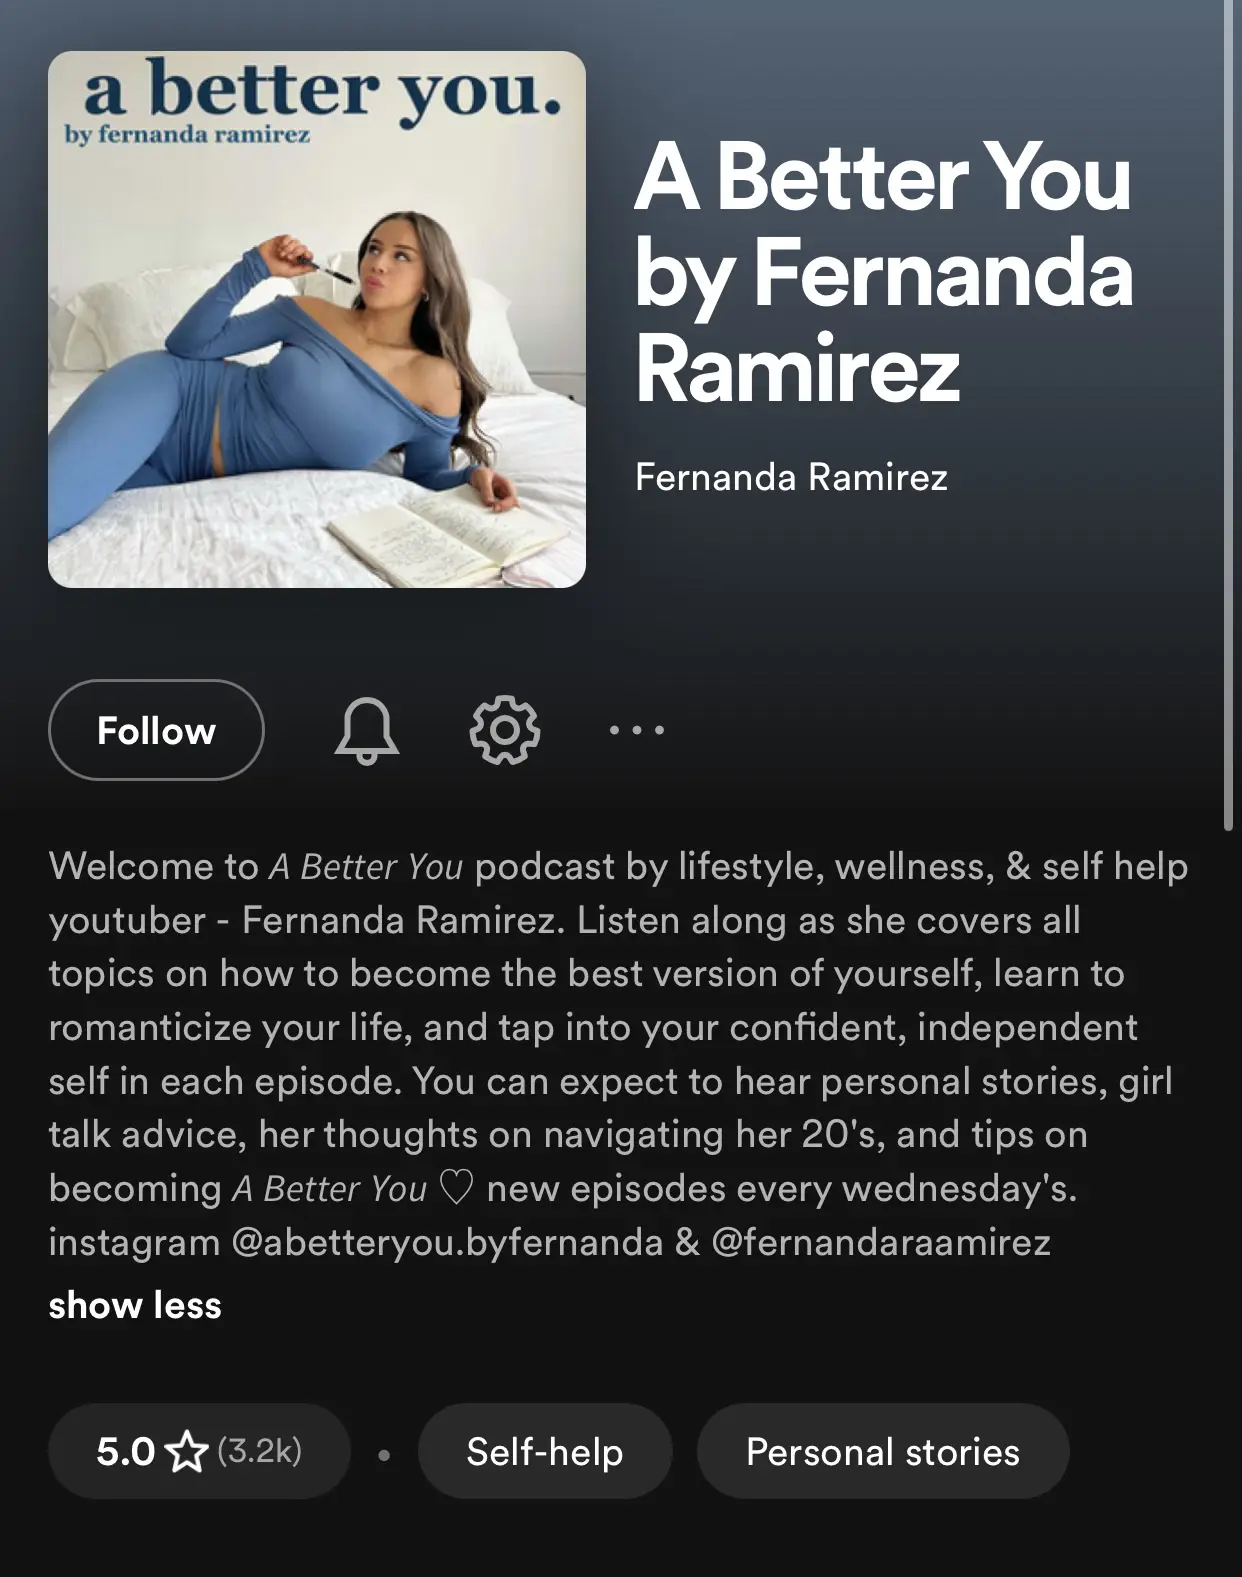  A podcast cover with a woman on it.